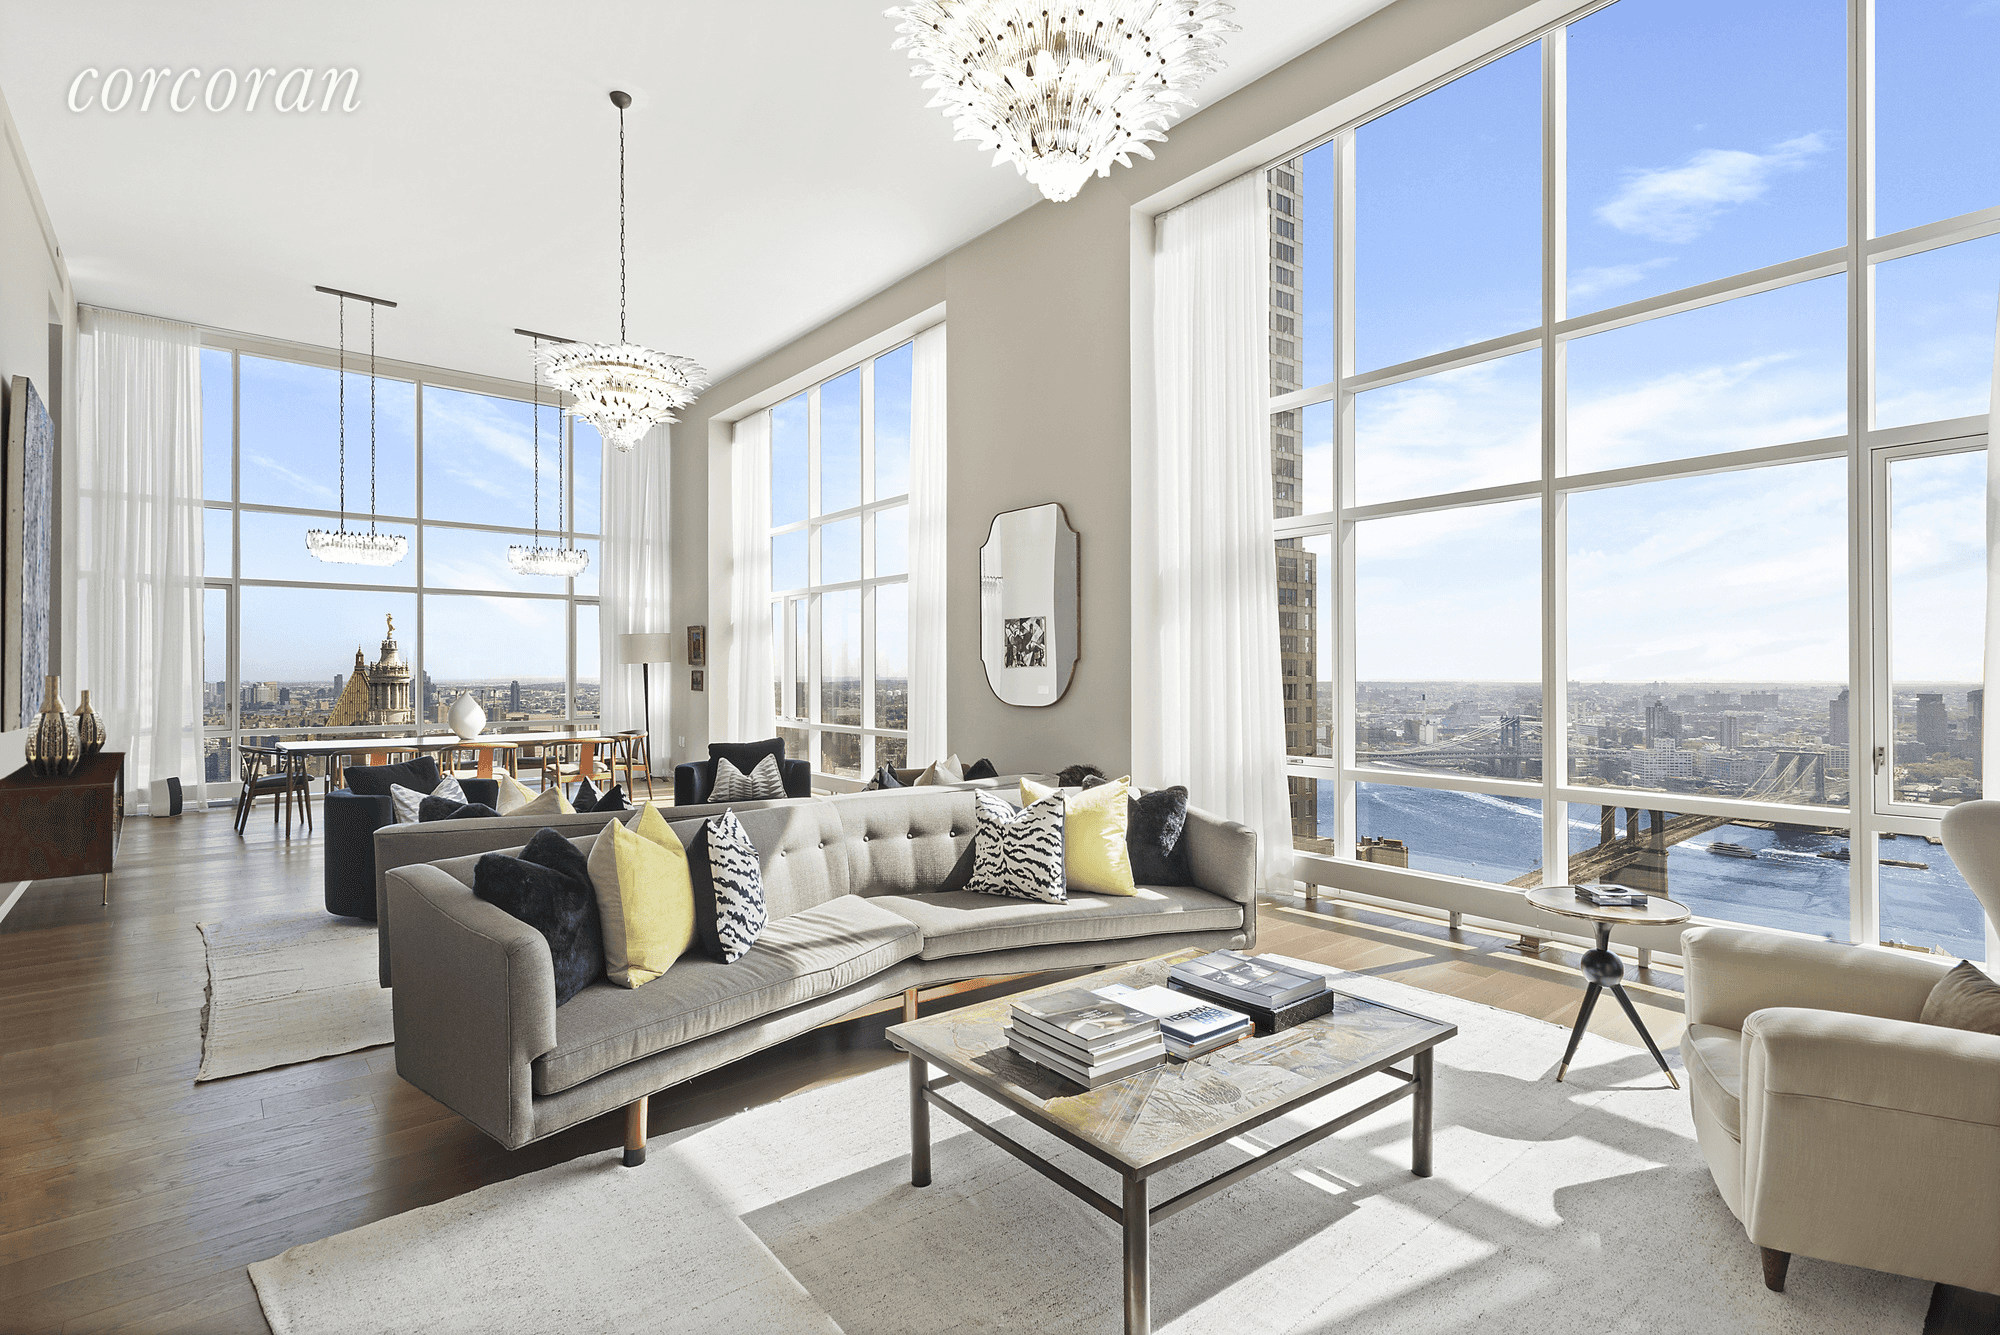 Floating high above New York City at the new 5 Beekman Street Residences, this impressive 3, 554sf full floor Penthouse wraps four corners offering mesmerizing views in every direction through ...